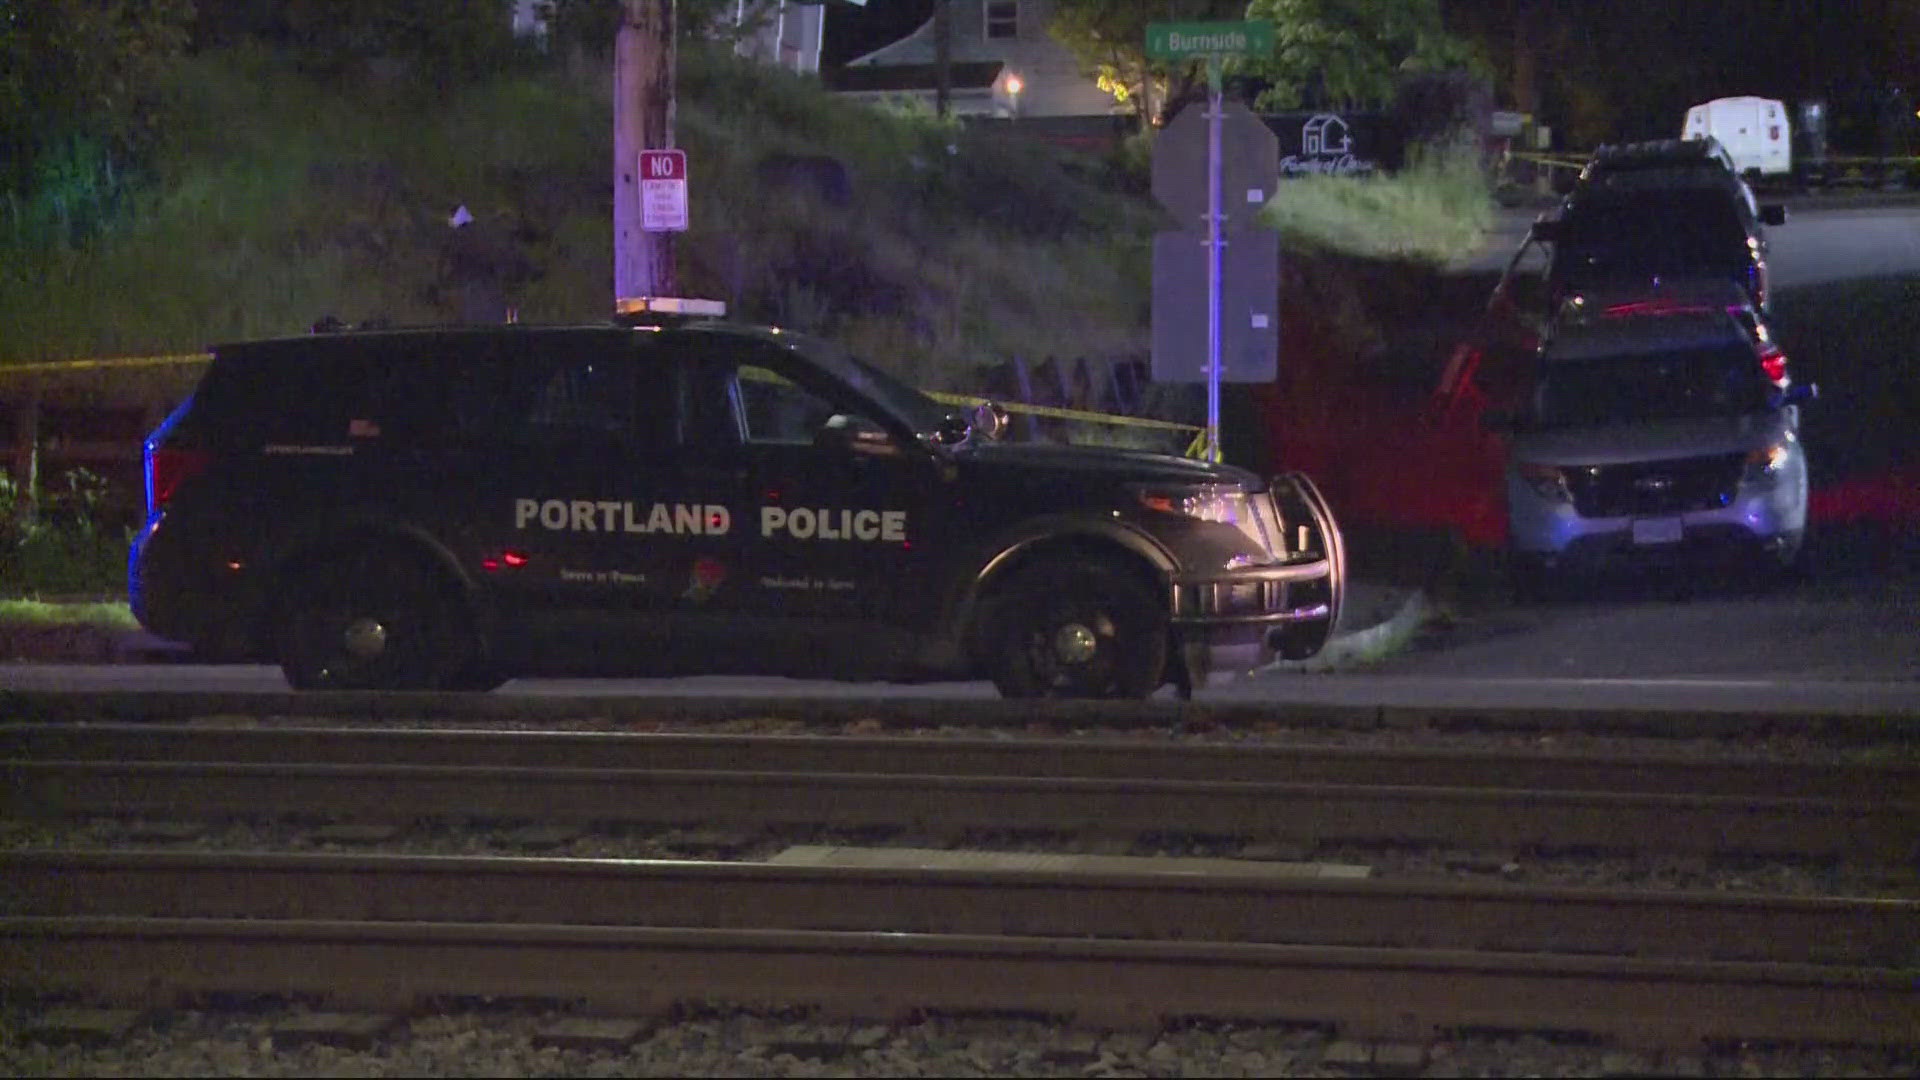 While serving the search warrant, the man fired at officers. Officers shot back at the man and hit him, according to the Portland Police Bureau.